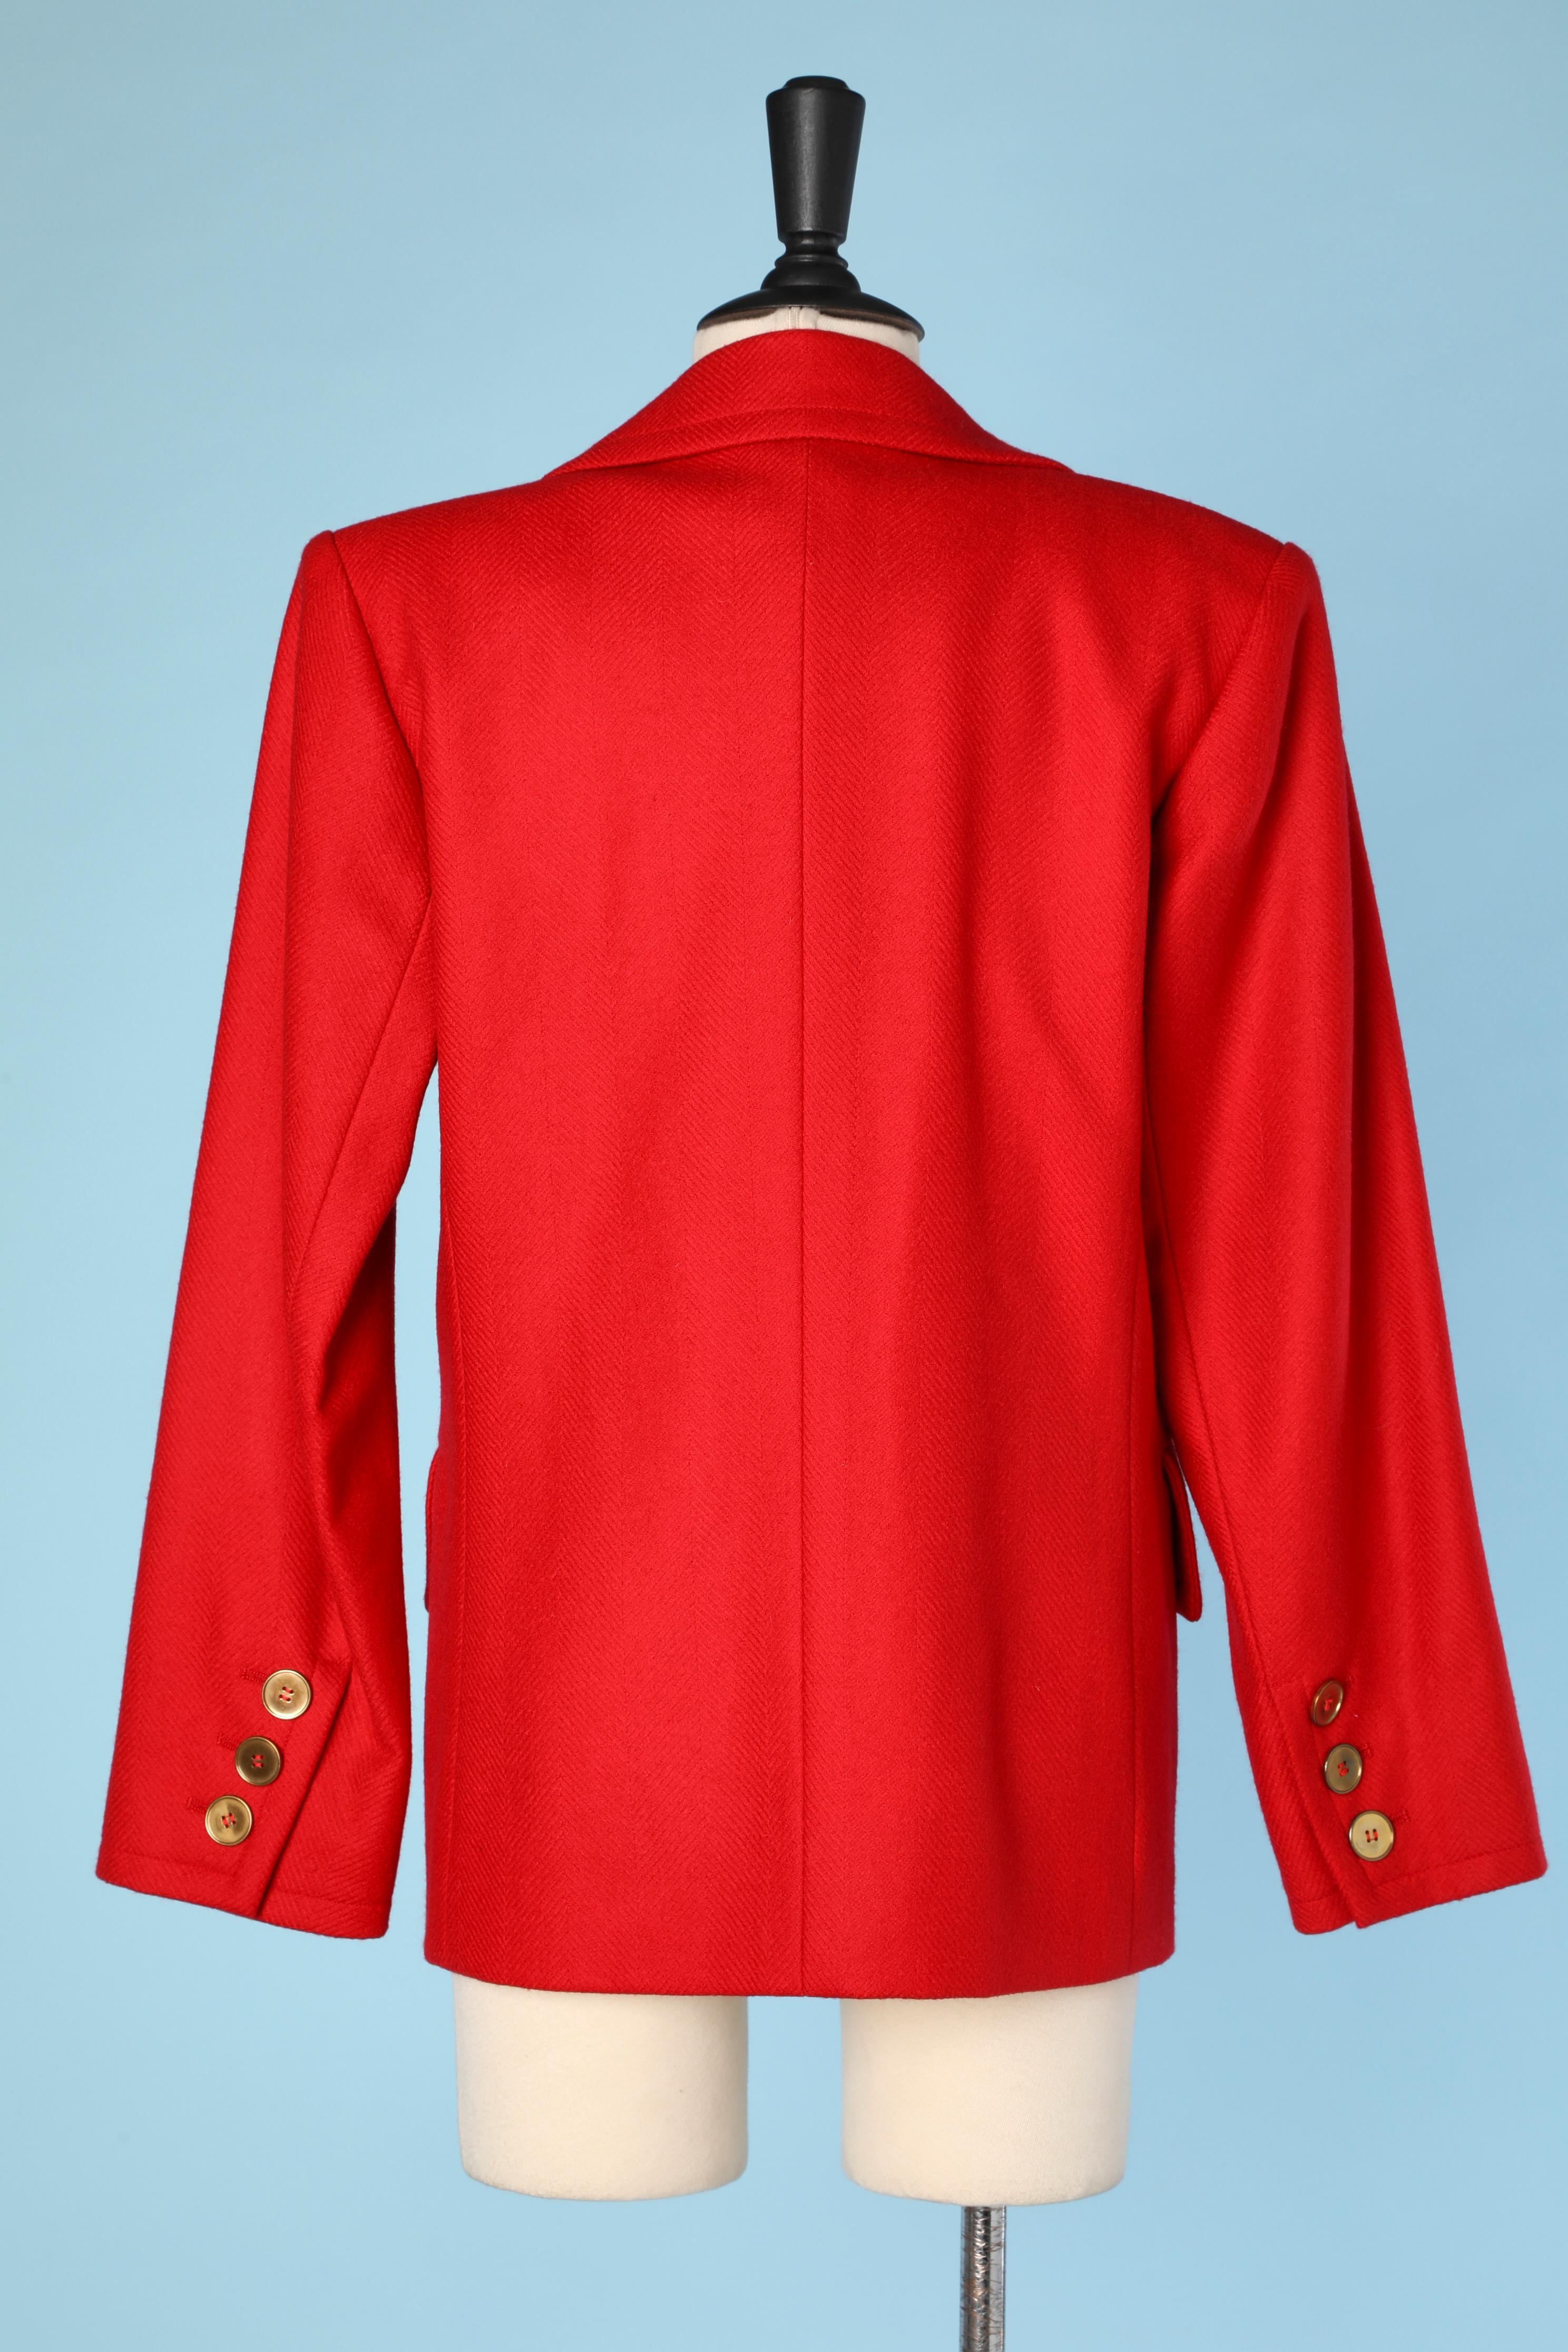 Women's Red wool double-breasted jacket with gold buttons Saint Laurent Rive Gauche For Sale